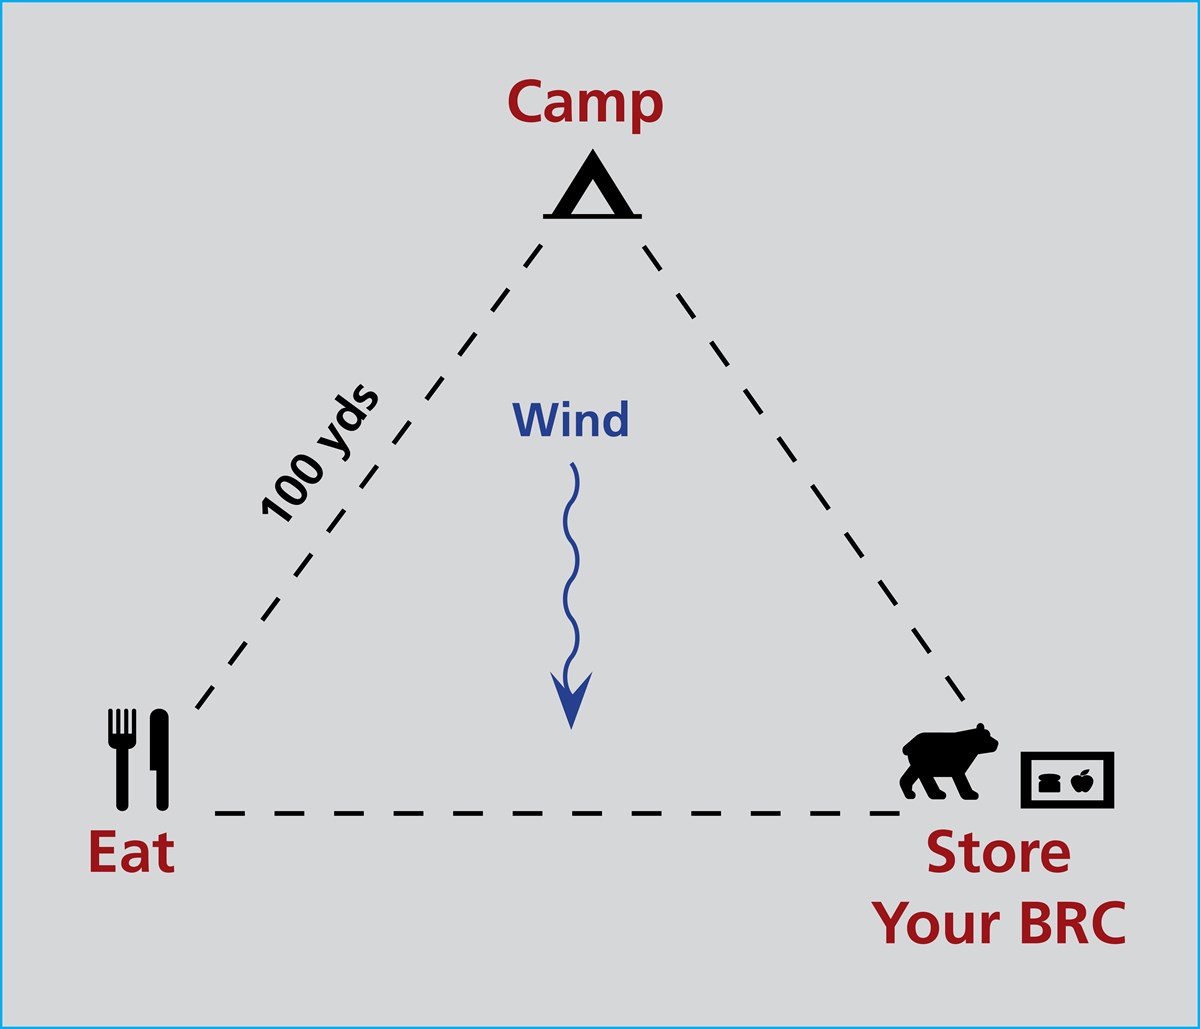 Bear safety triangle showing that you should camp, eat, and store your BRC at least 100 yds away from each location.